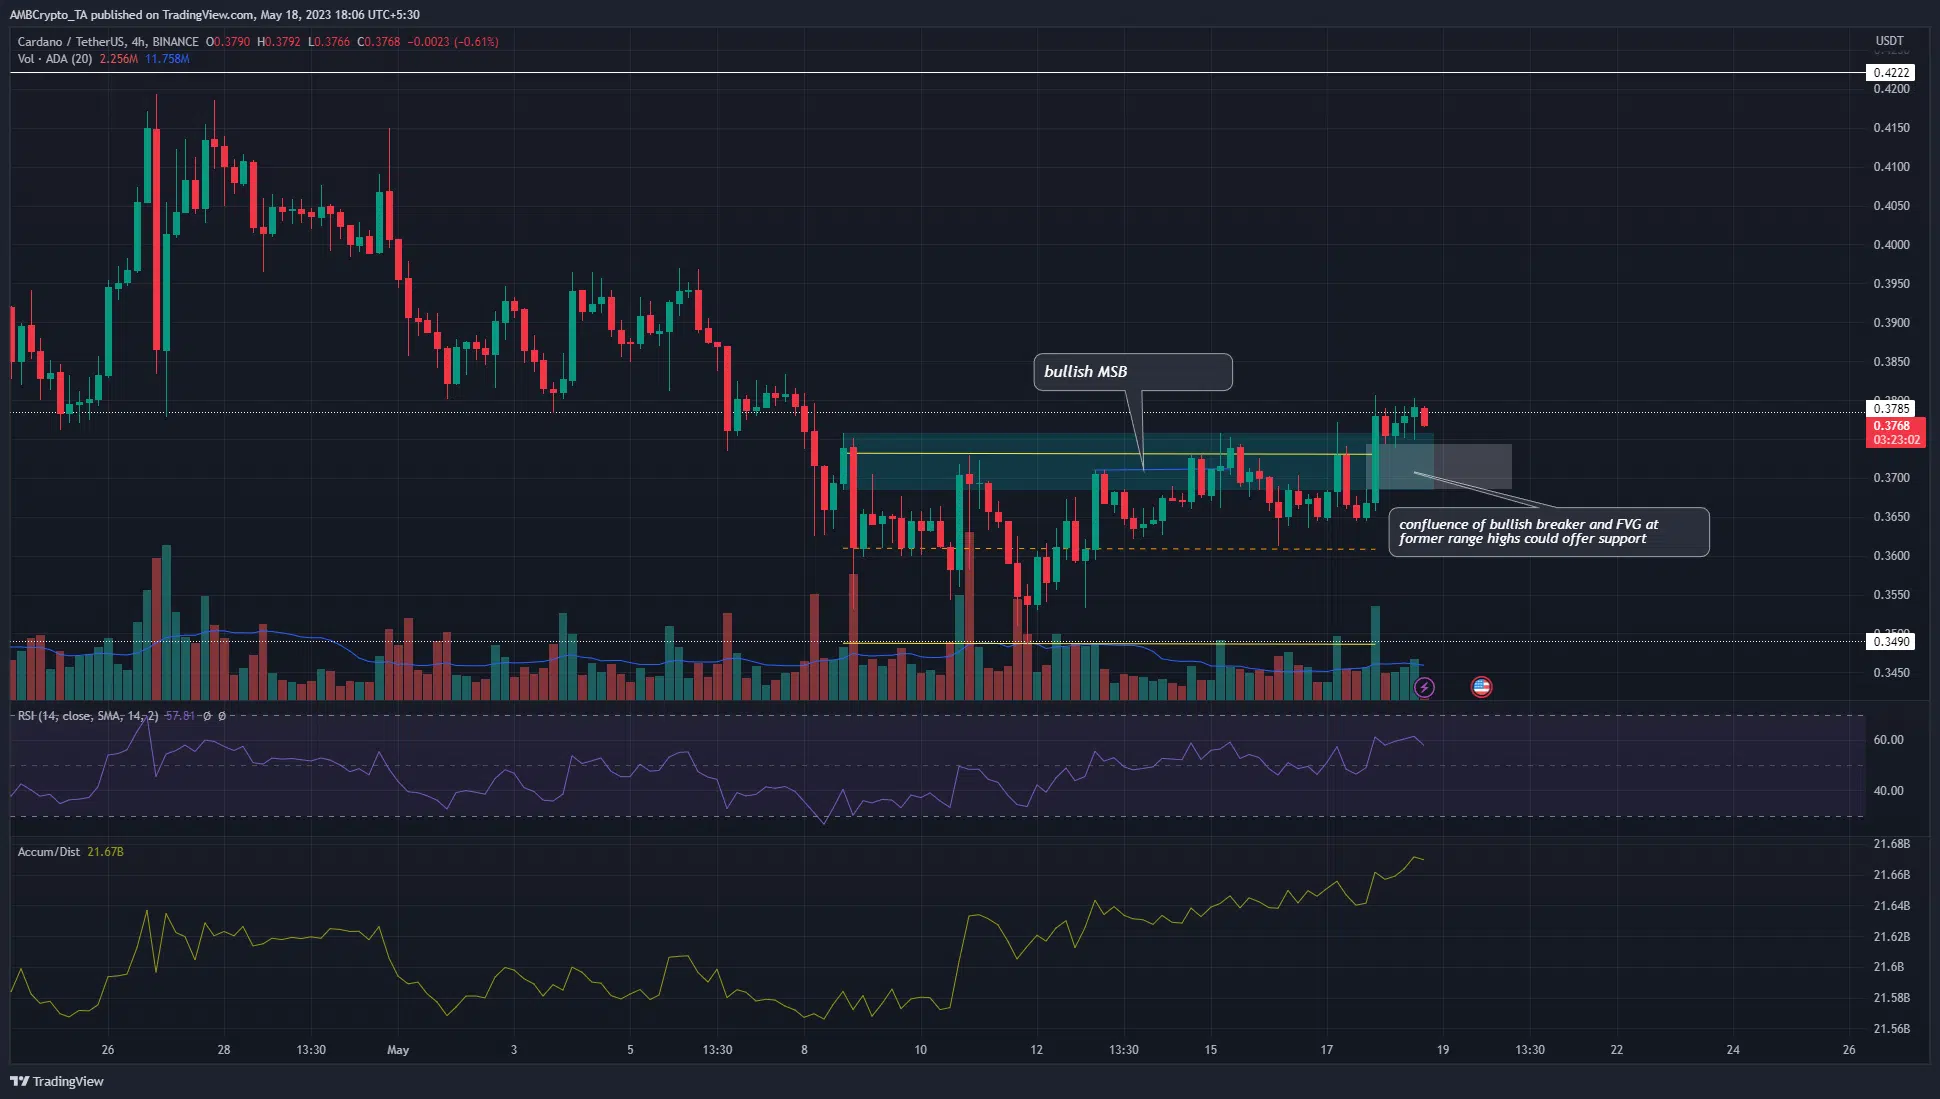 Cardano breaks out past range highs, should bulls prepare for a rally?